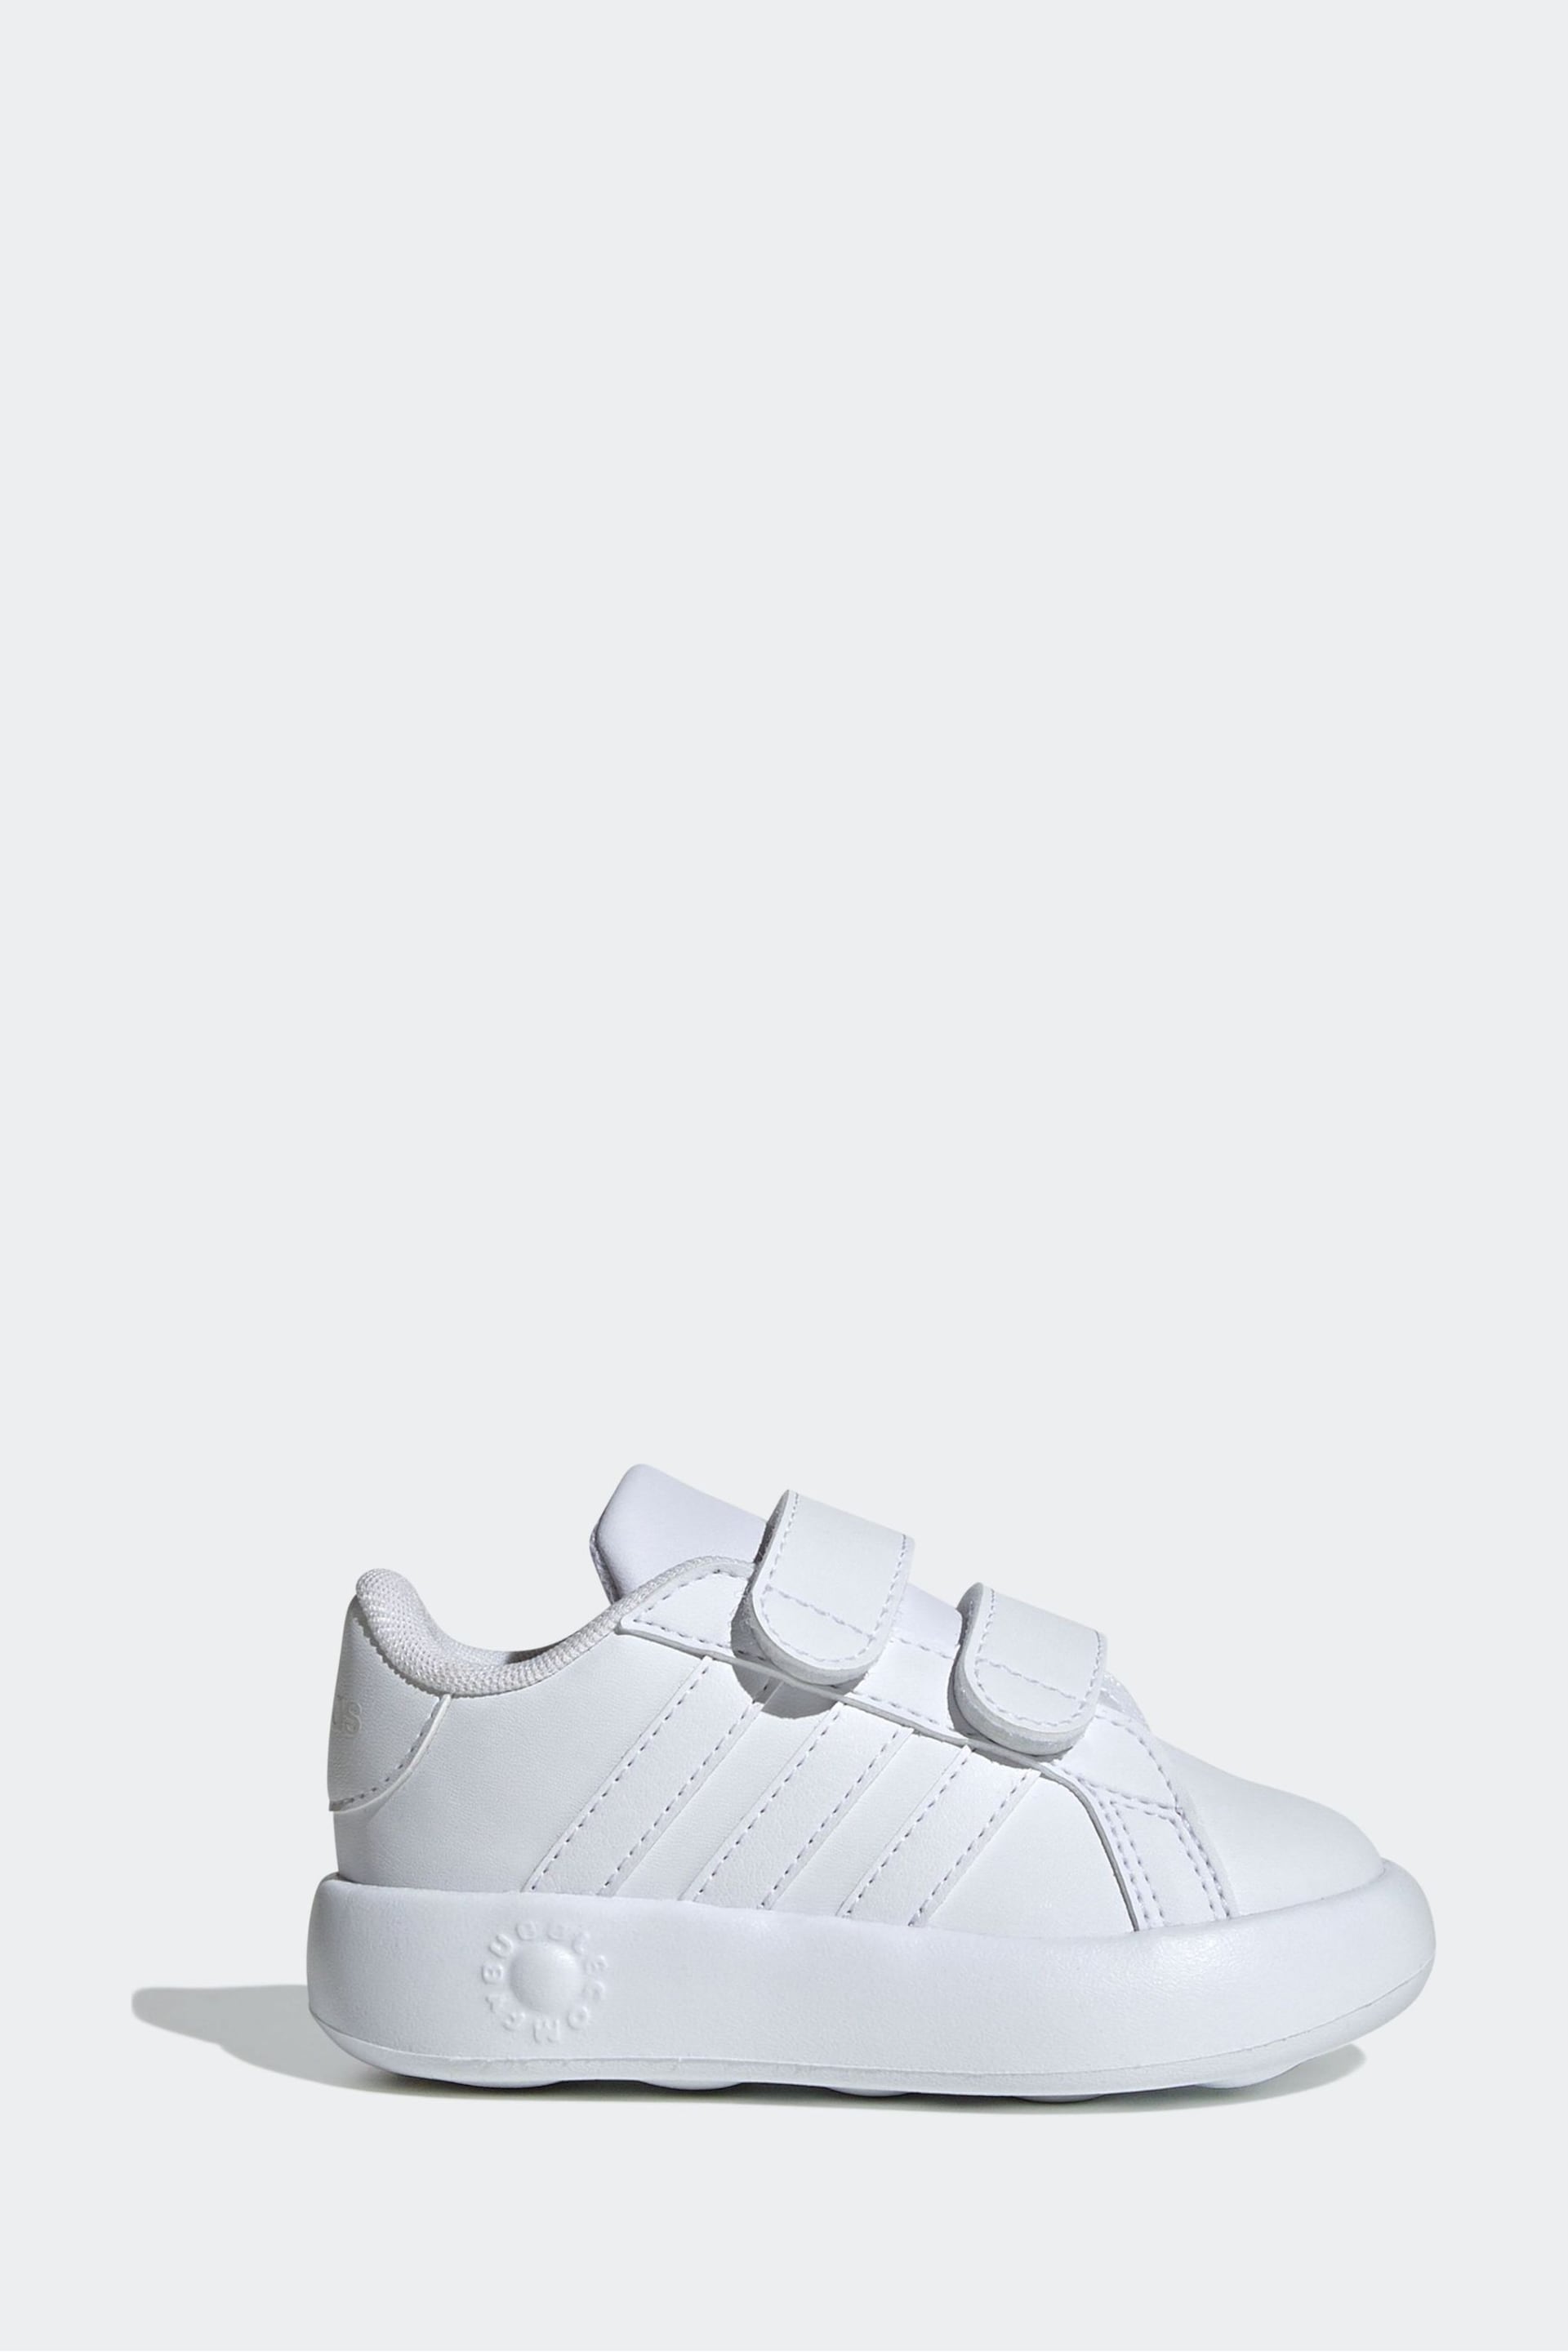 adidas White Kids Grand Court 2.0 Shoes - Image 1 of 8